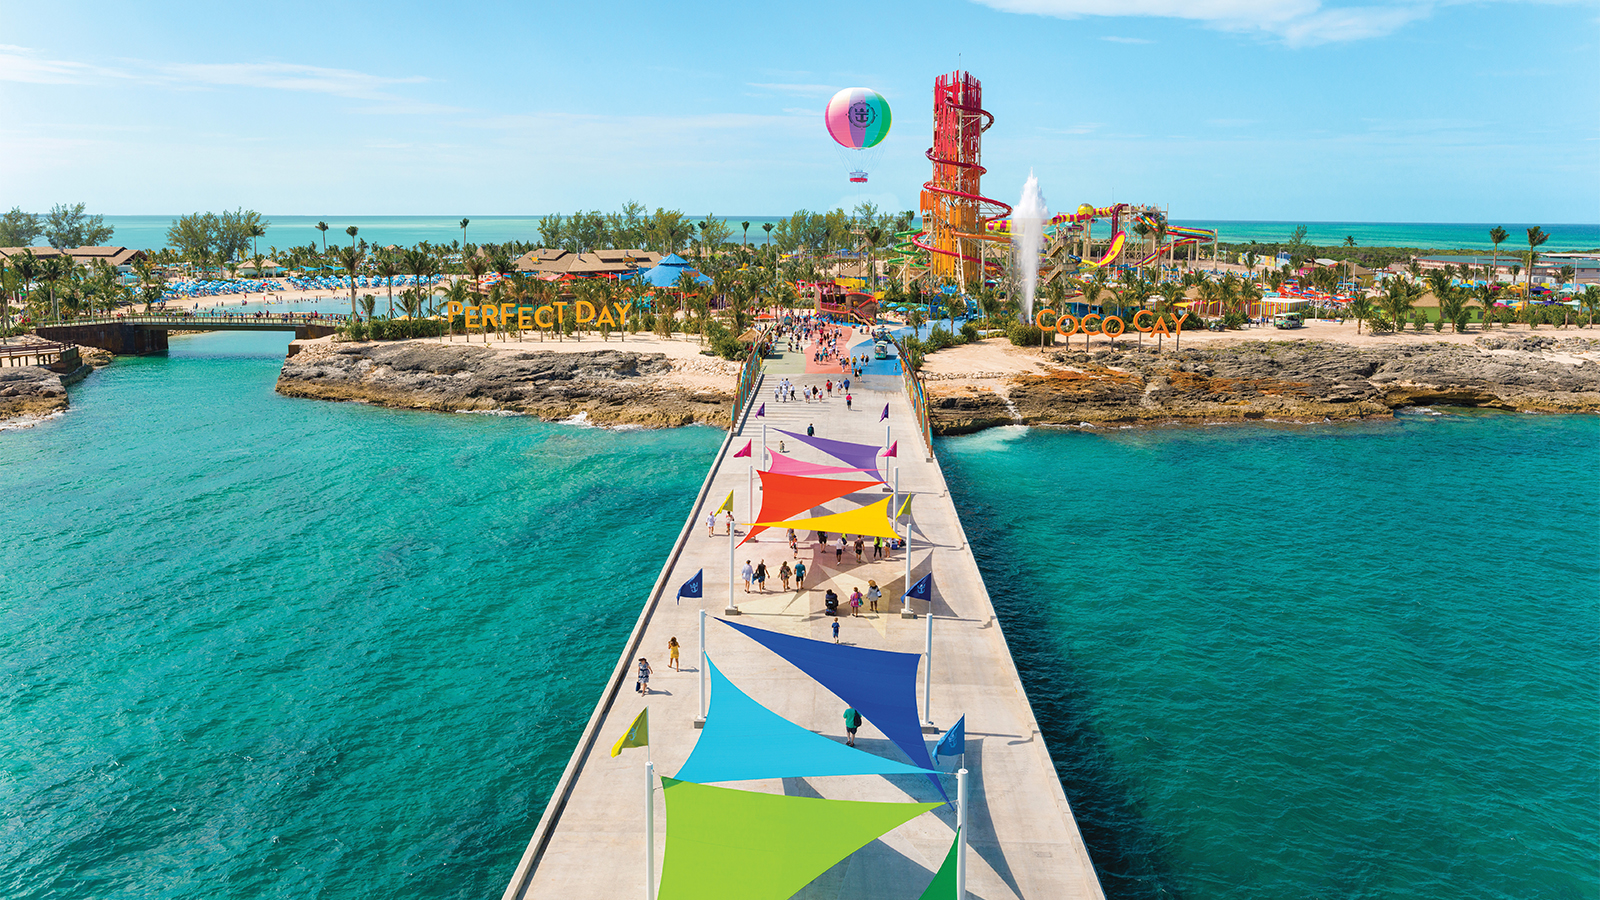 Perfect Day at CocoCay-PierEntrance